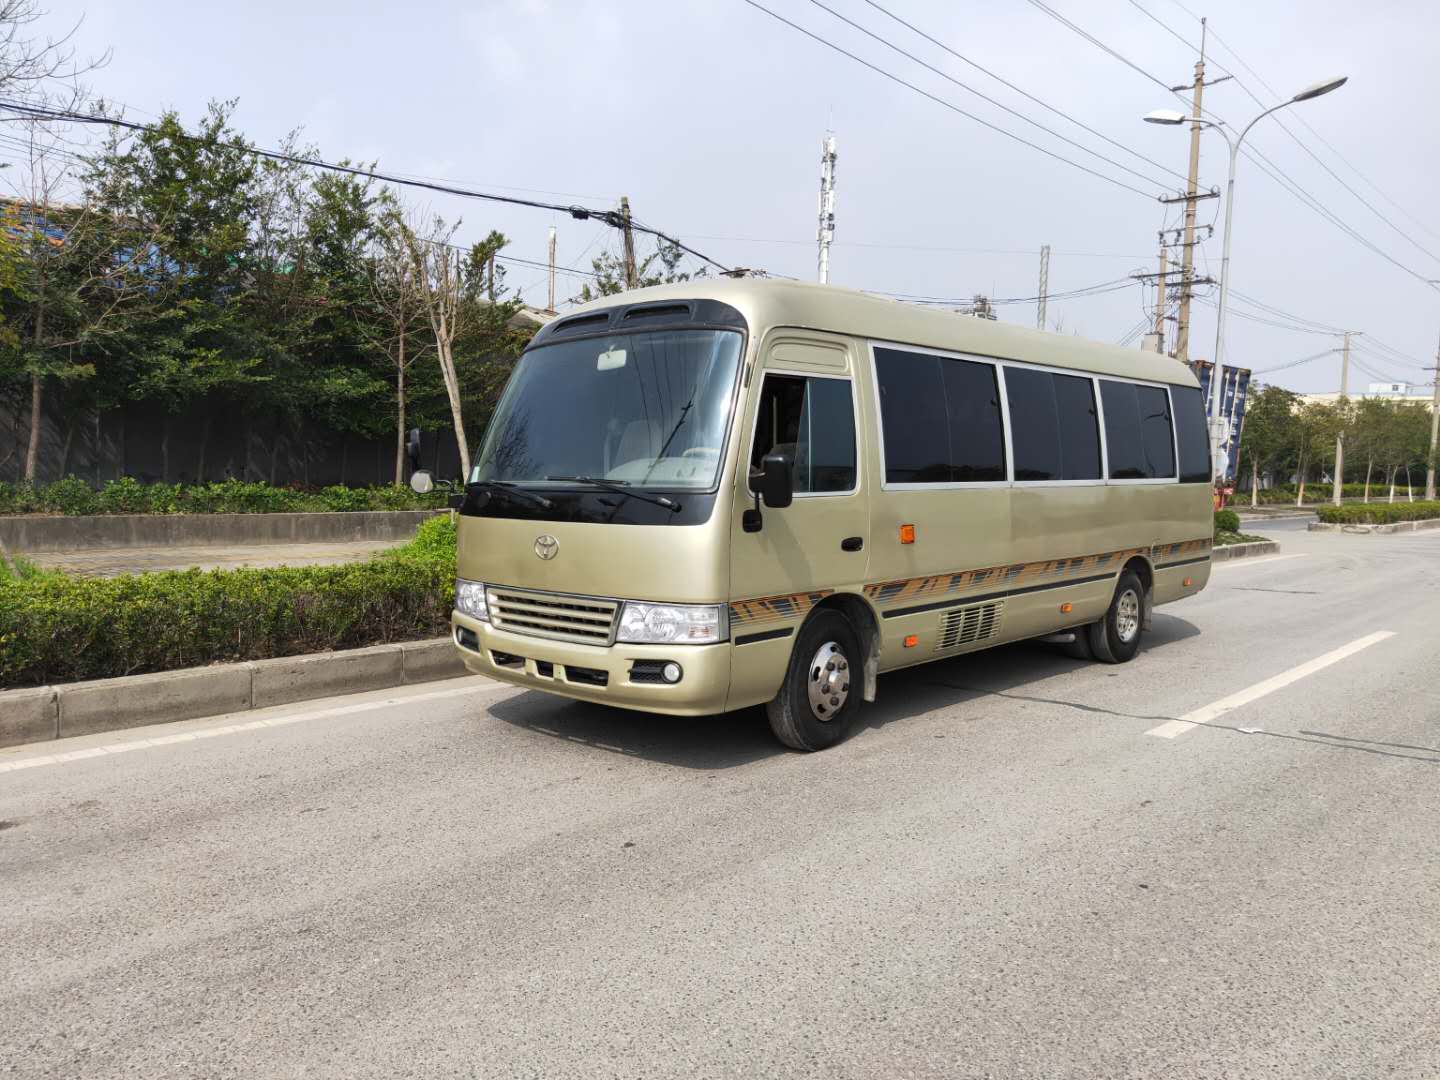 Quality japan mini car 30seats 2016 2017 used Toyota coaster for sale with cheap price wholesale